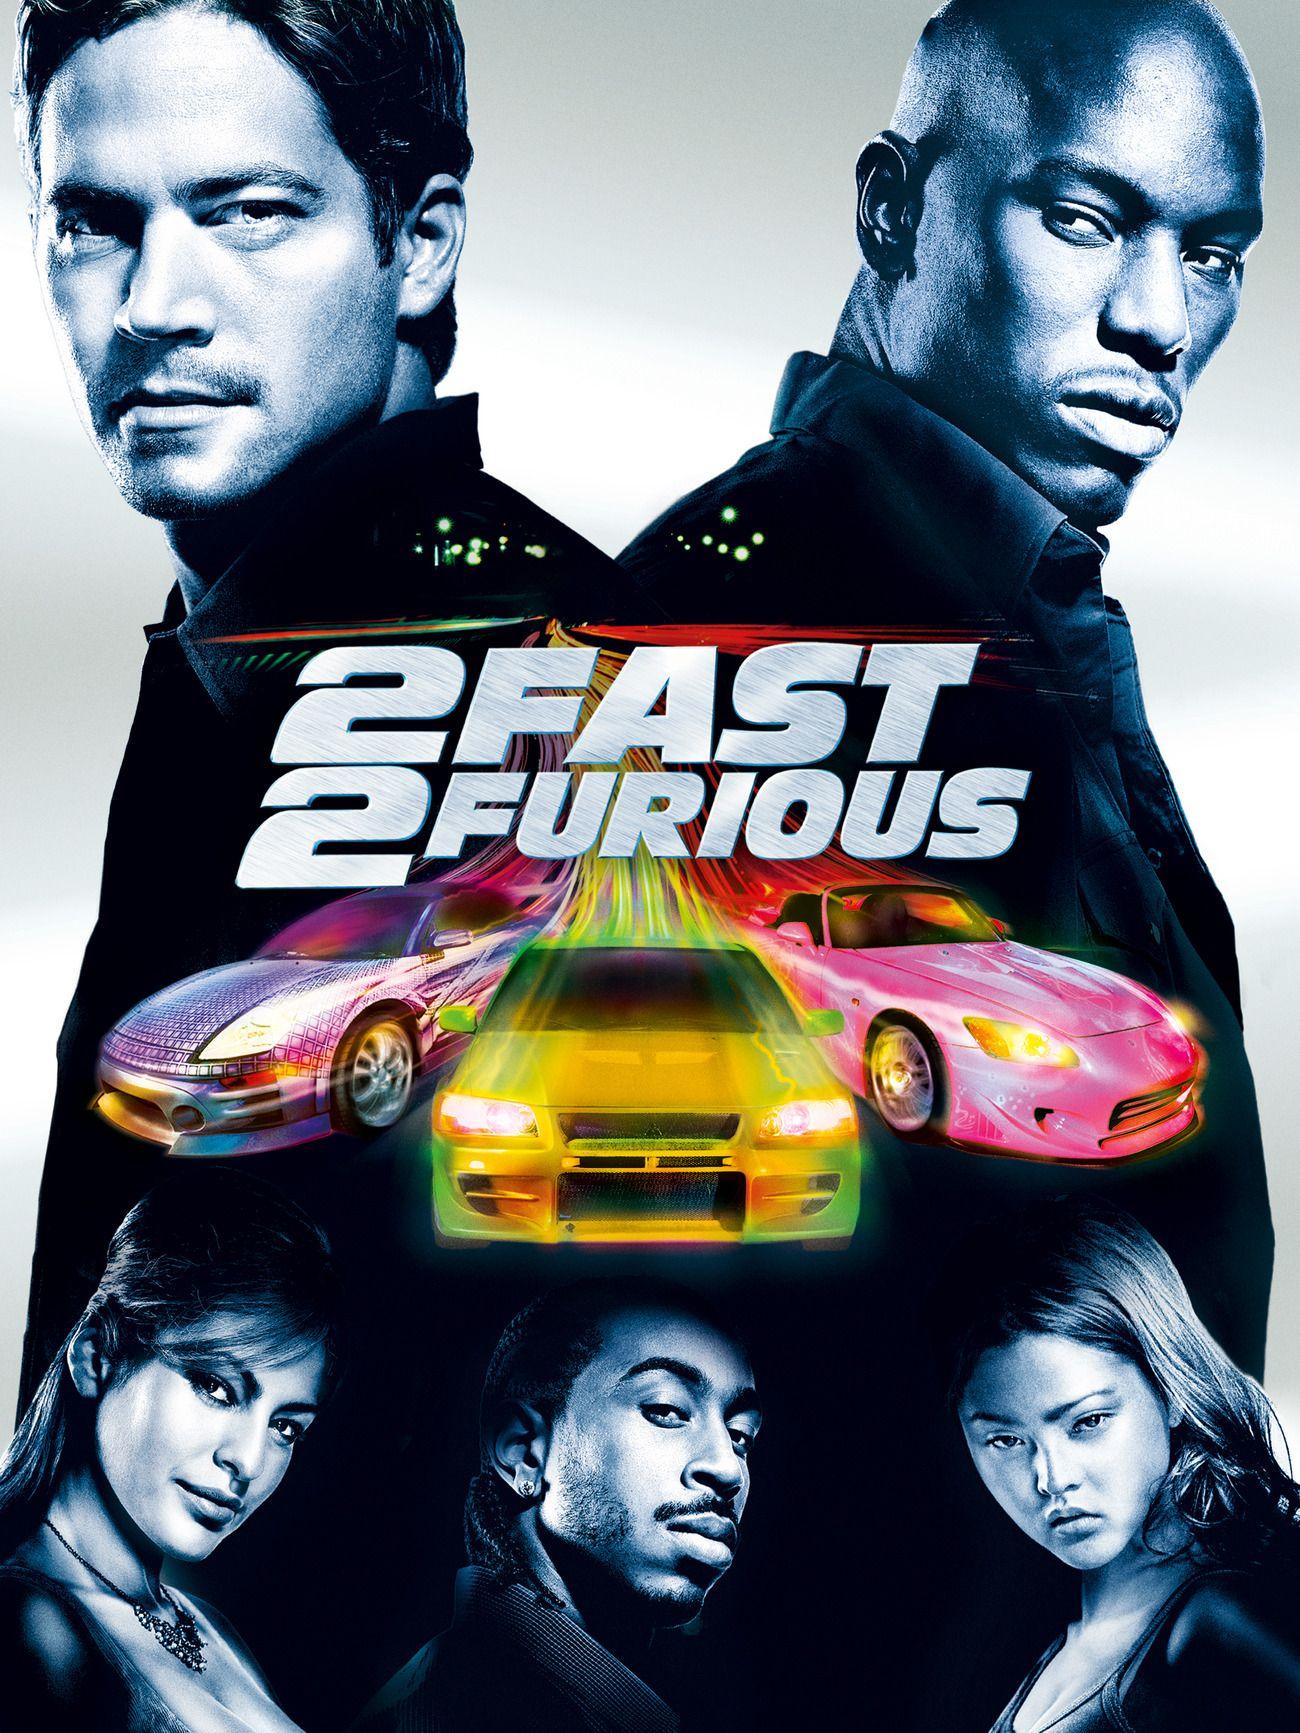 2 fast 2 furious hd download